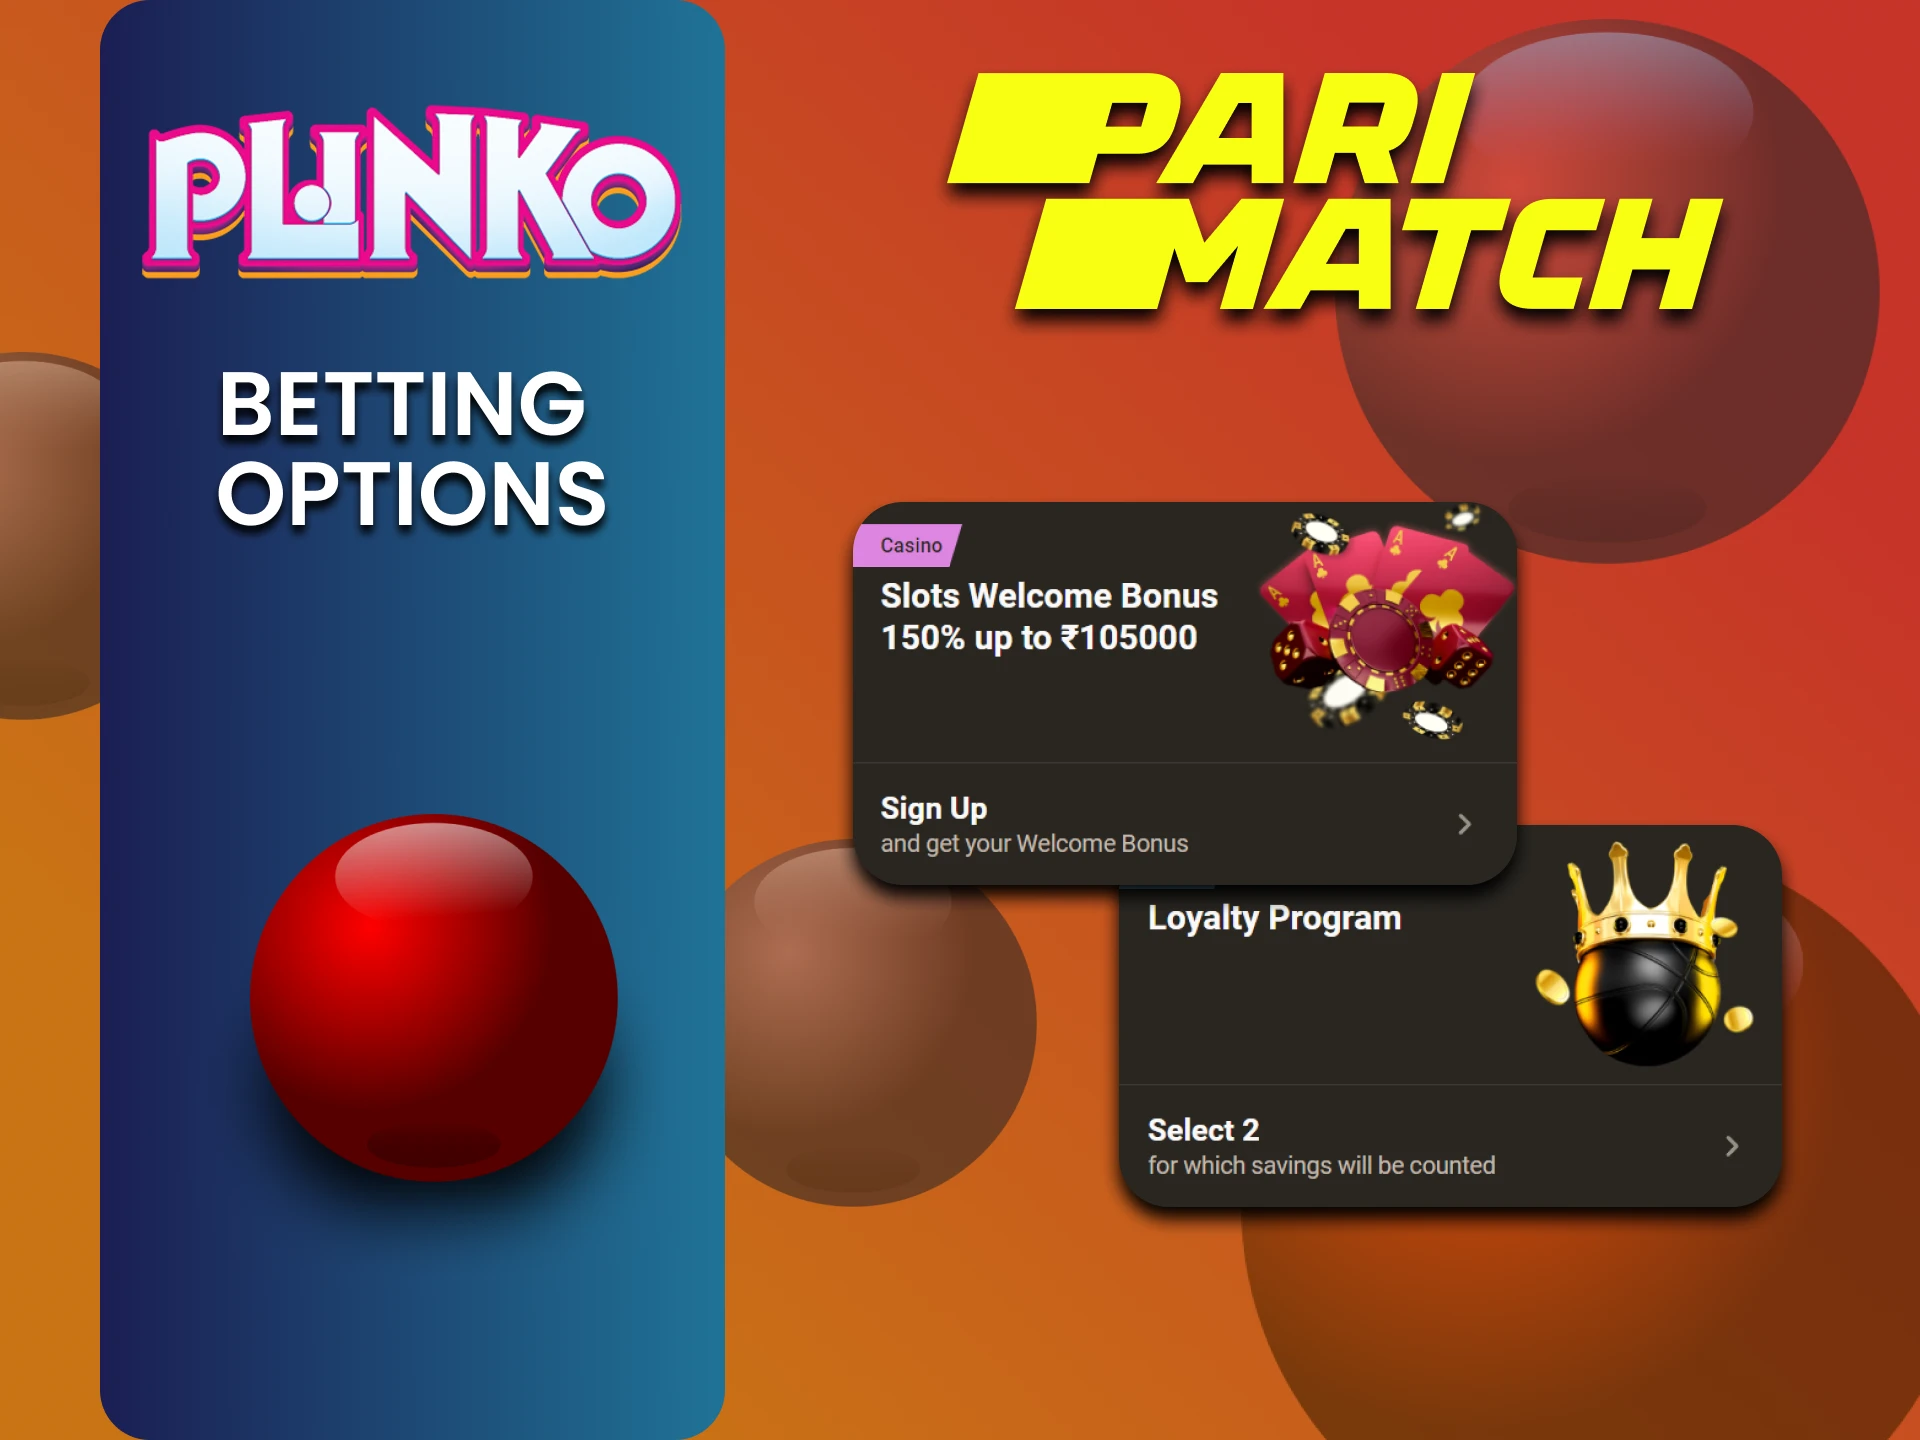 Get a bonus for playing Plinko from Parimatch.